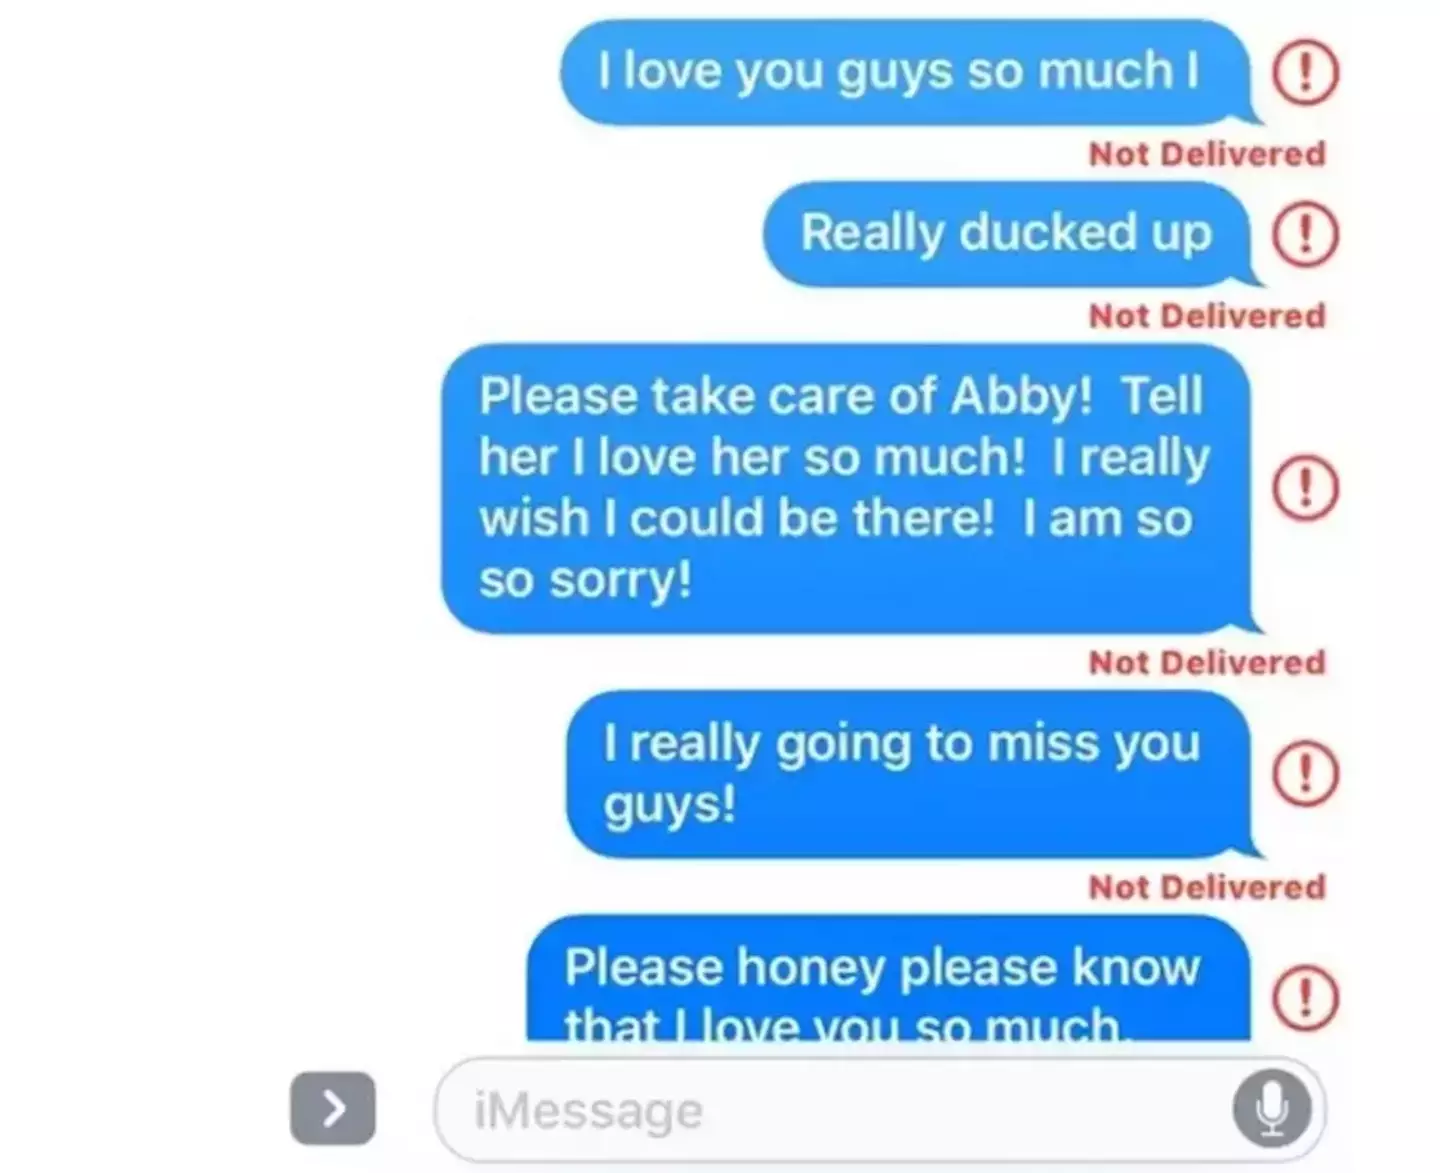 The texts Jeremy tried to send to his wife.